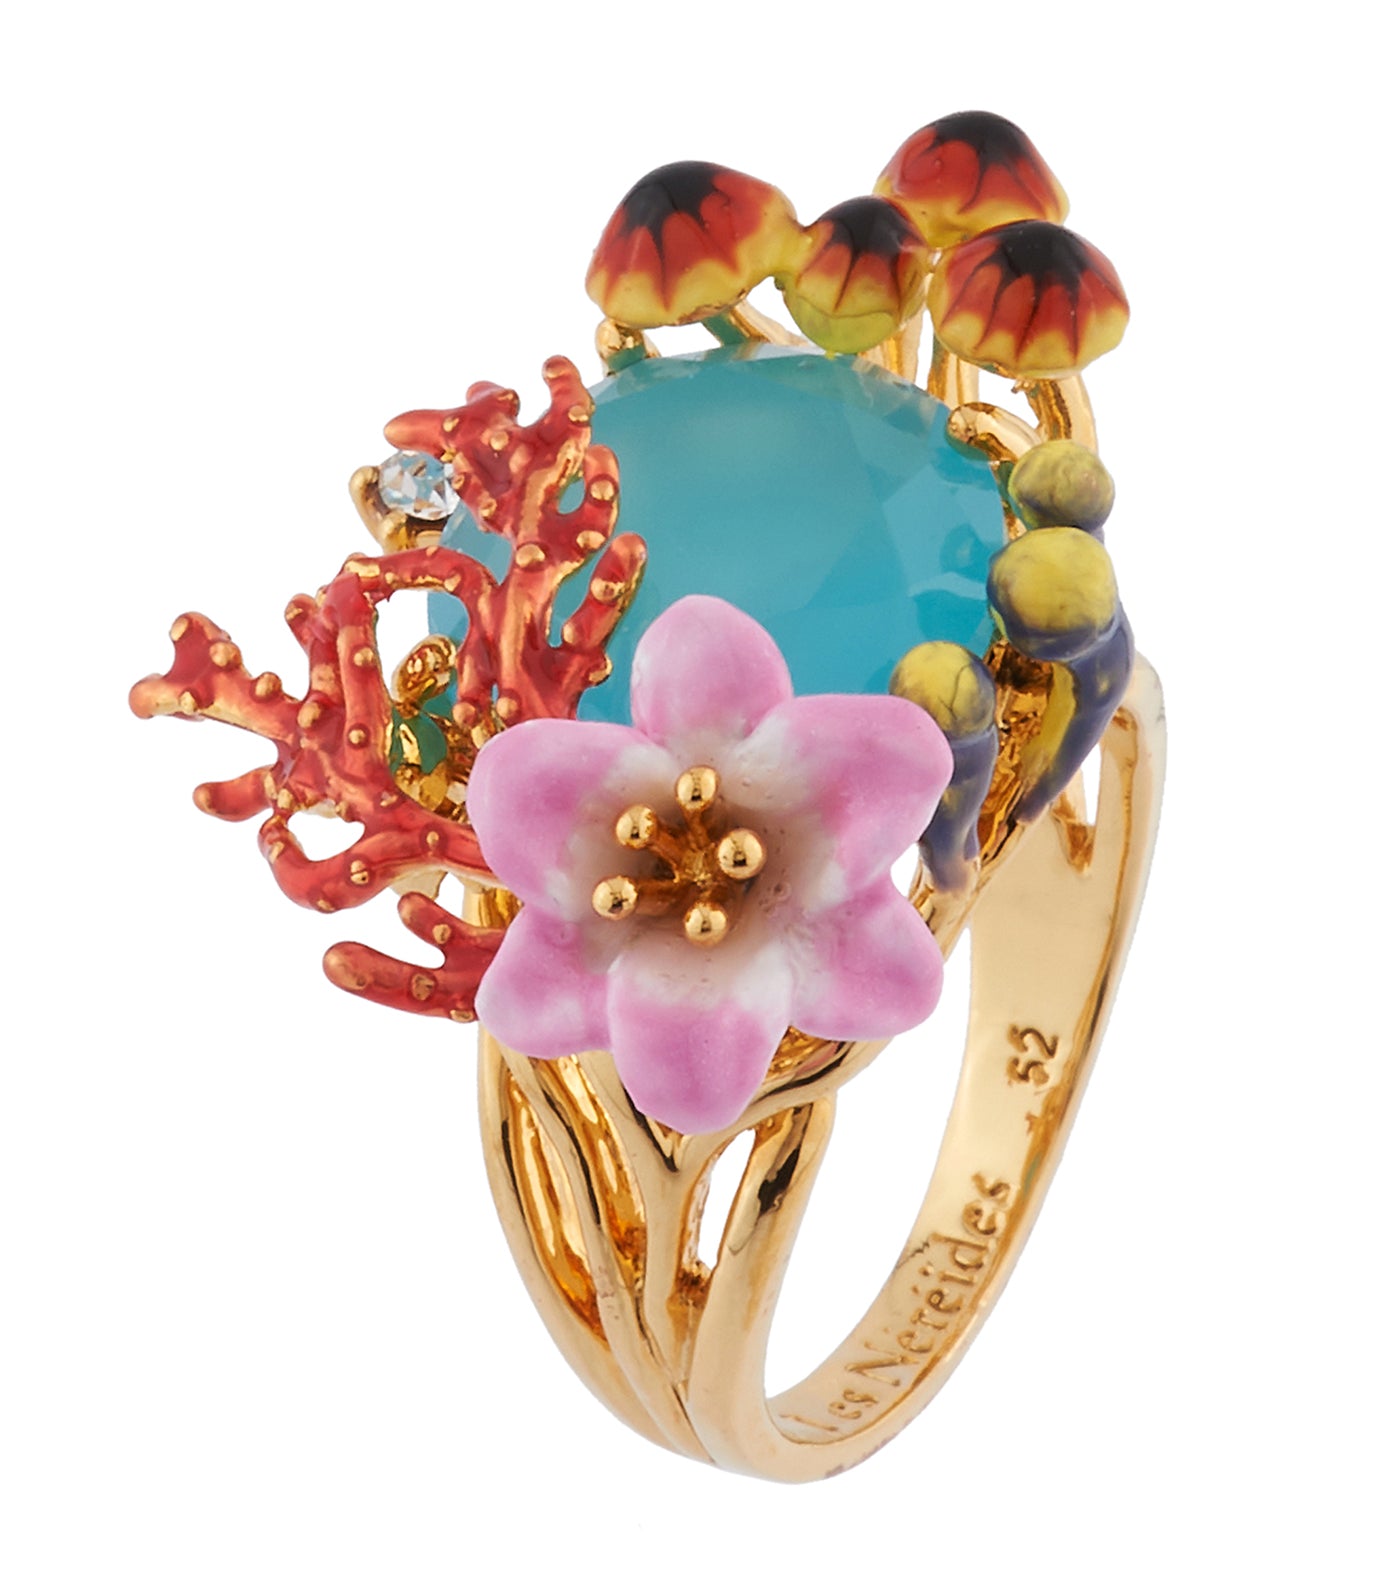 les néréides corals, aquatic mushrooms and flowers on faceted glass ring